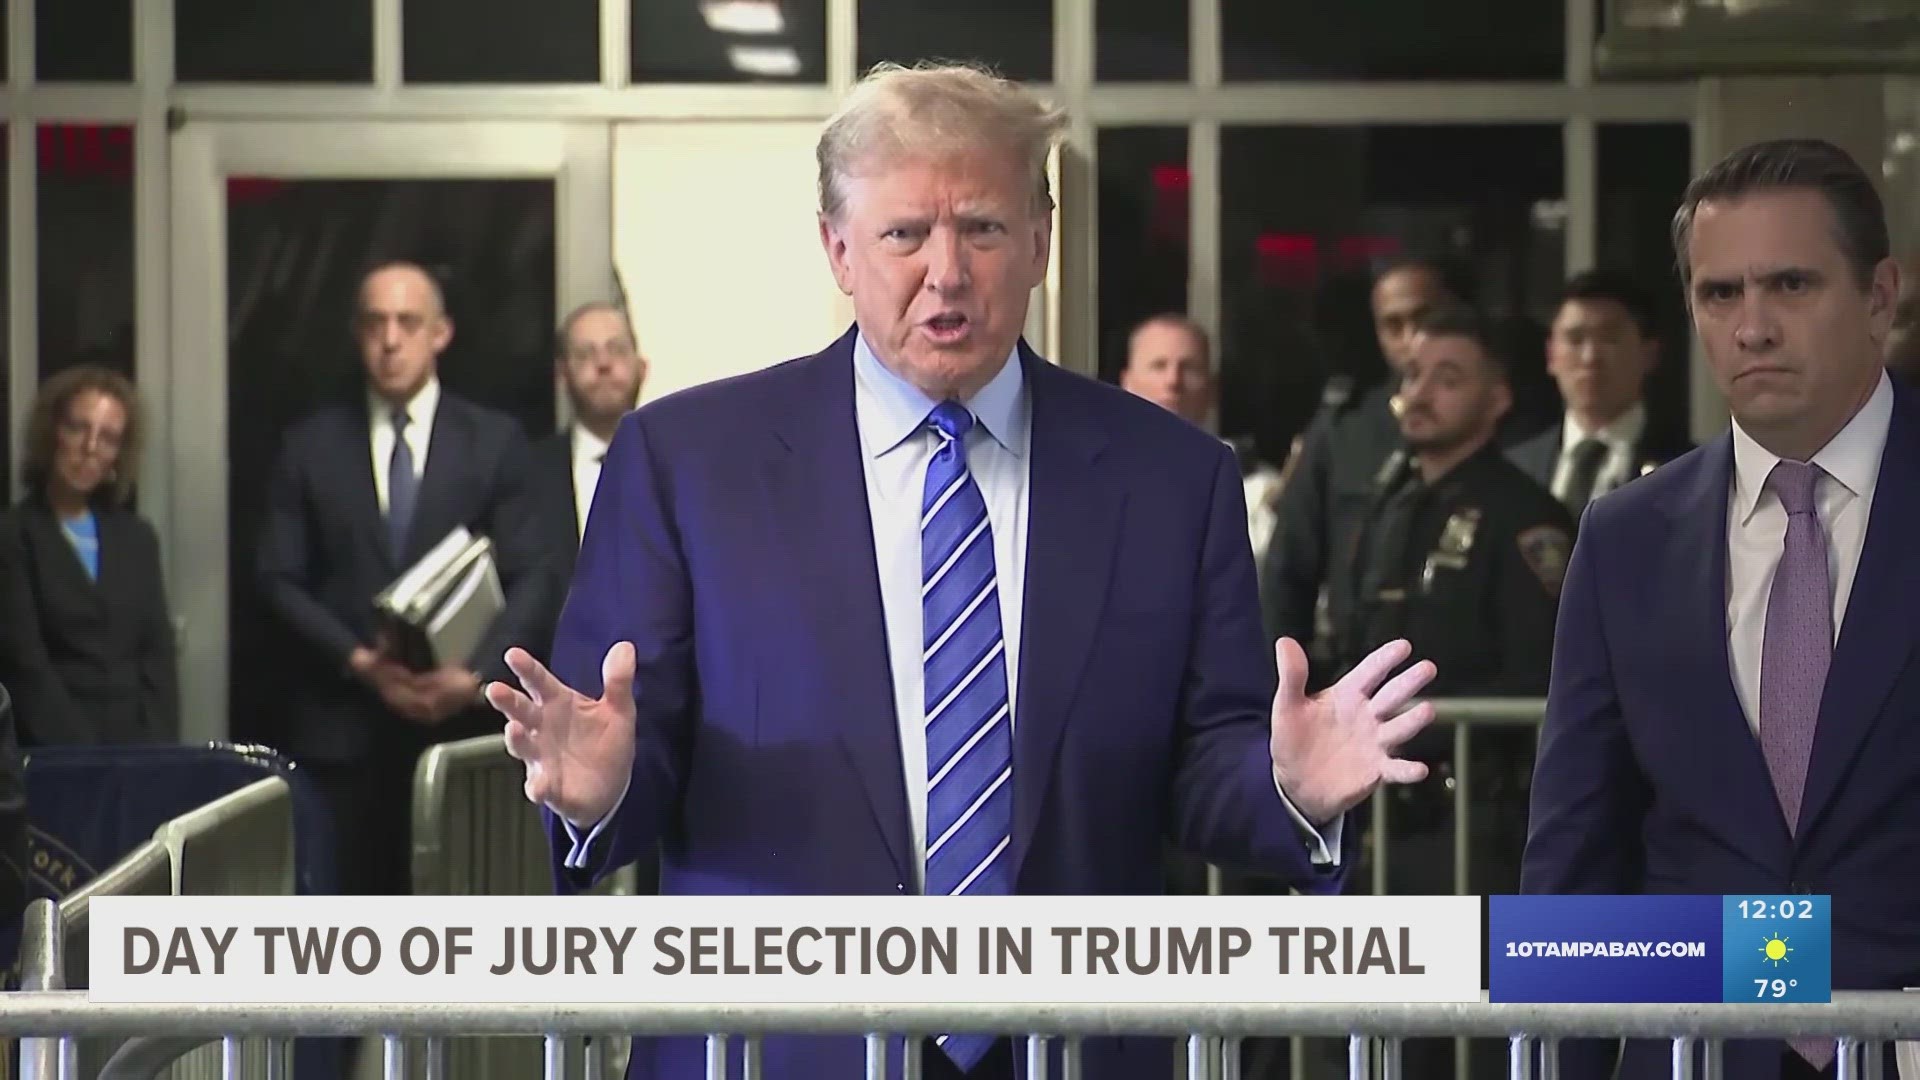 The first day of Trump’s history-making trial in Manhattan ended with no one yet chosen to be on the panel of 12 jurors and six alternates.